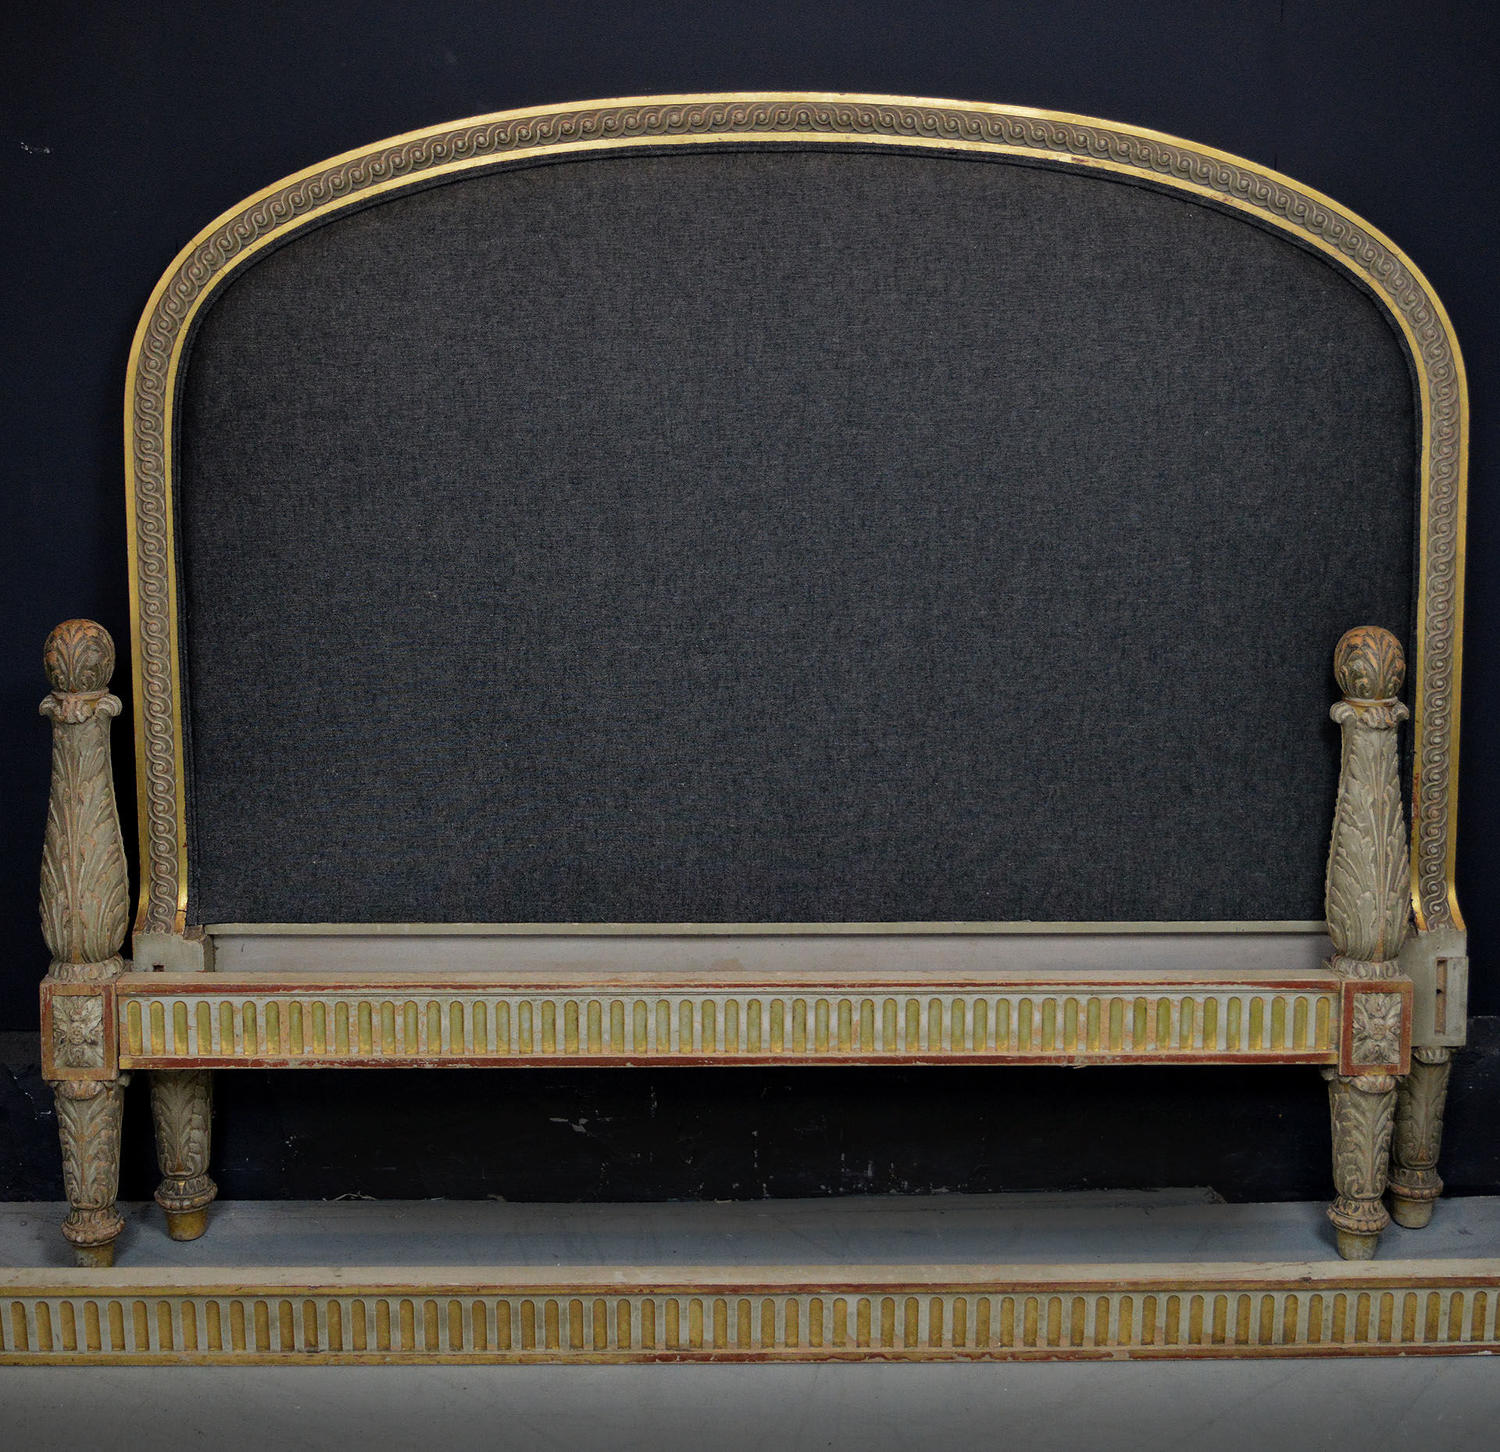 King-size 19th Century Louis XVI style bedstead